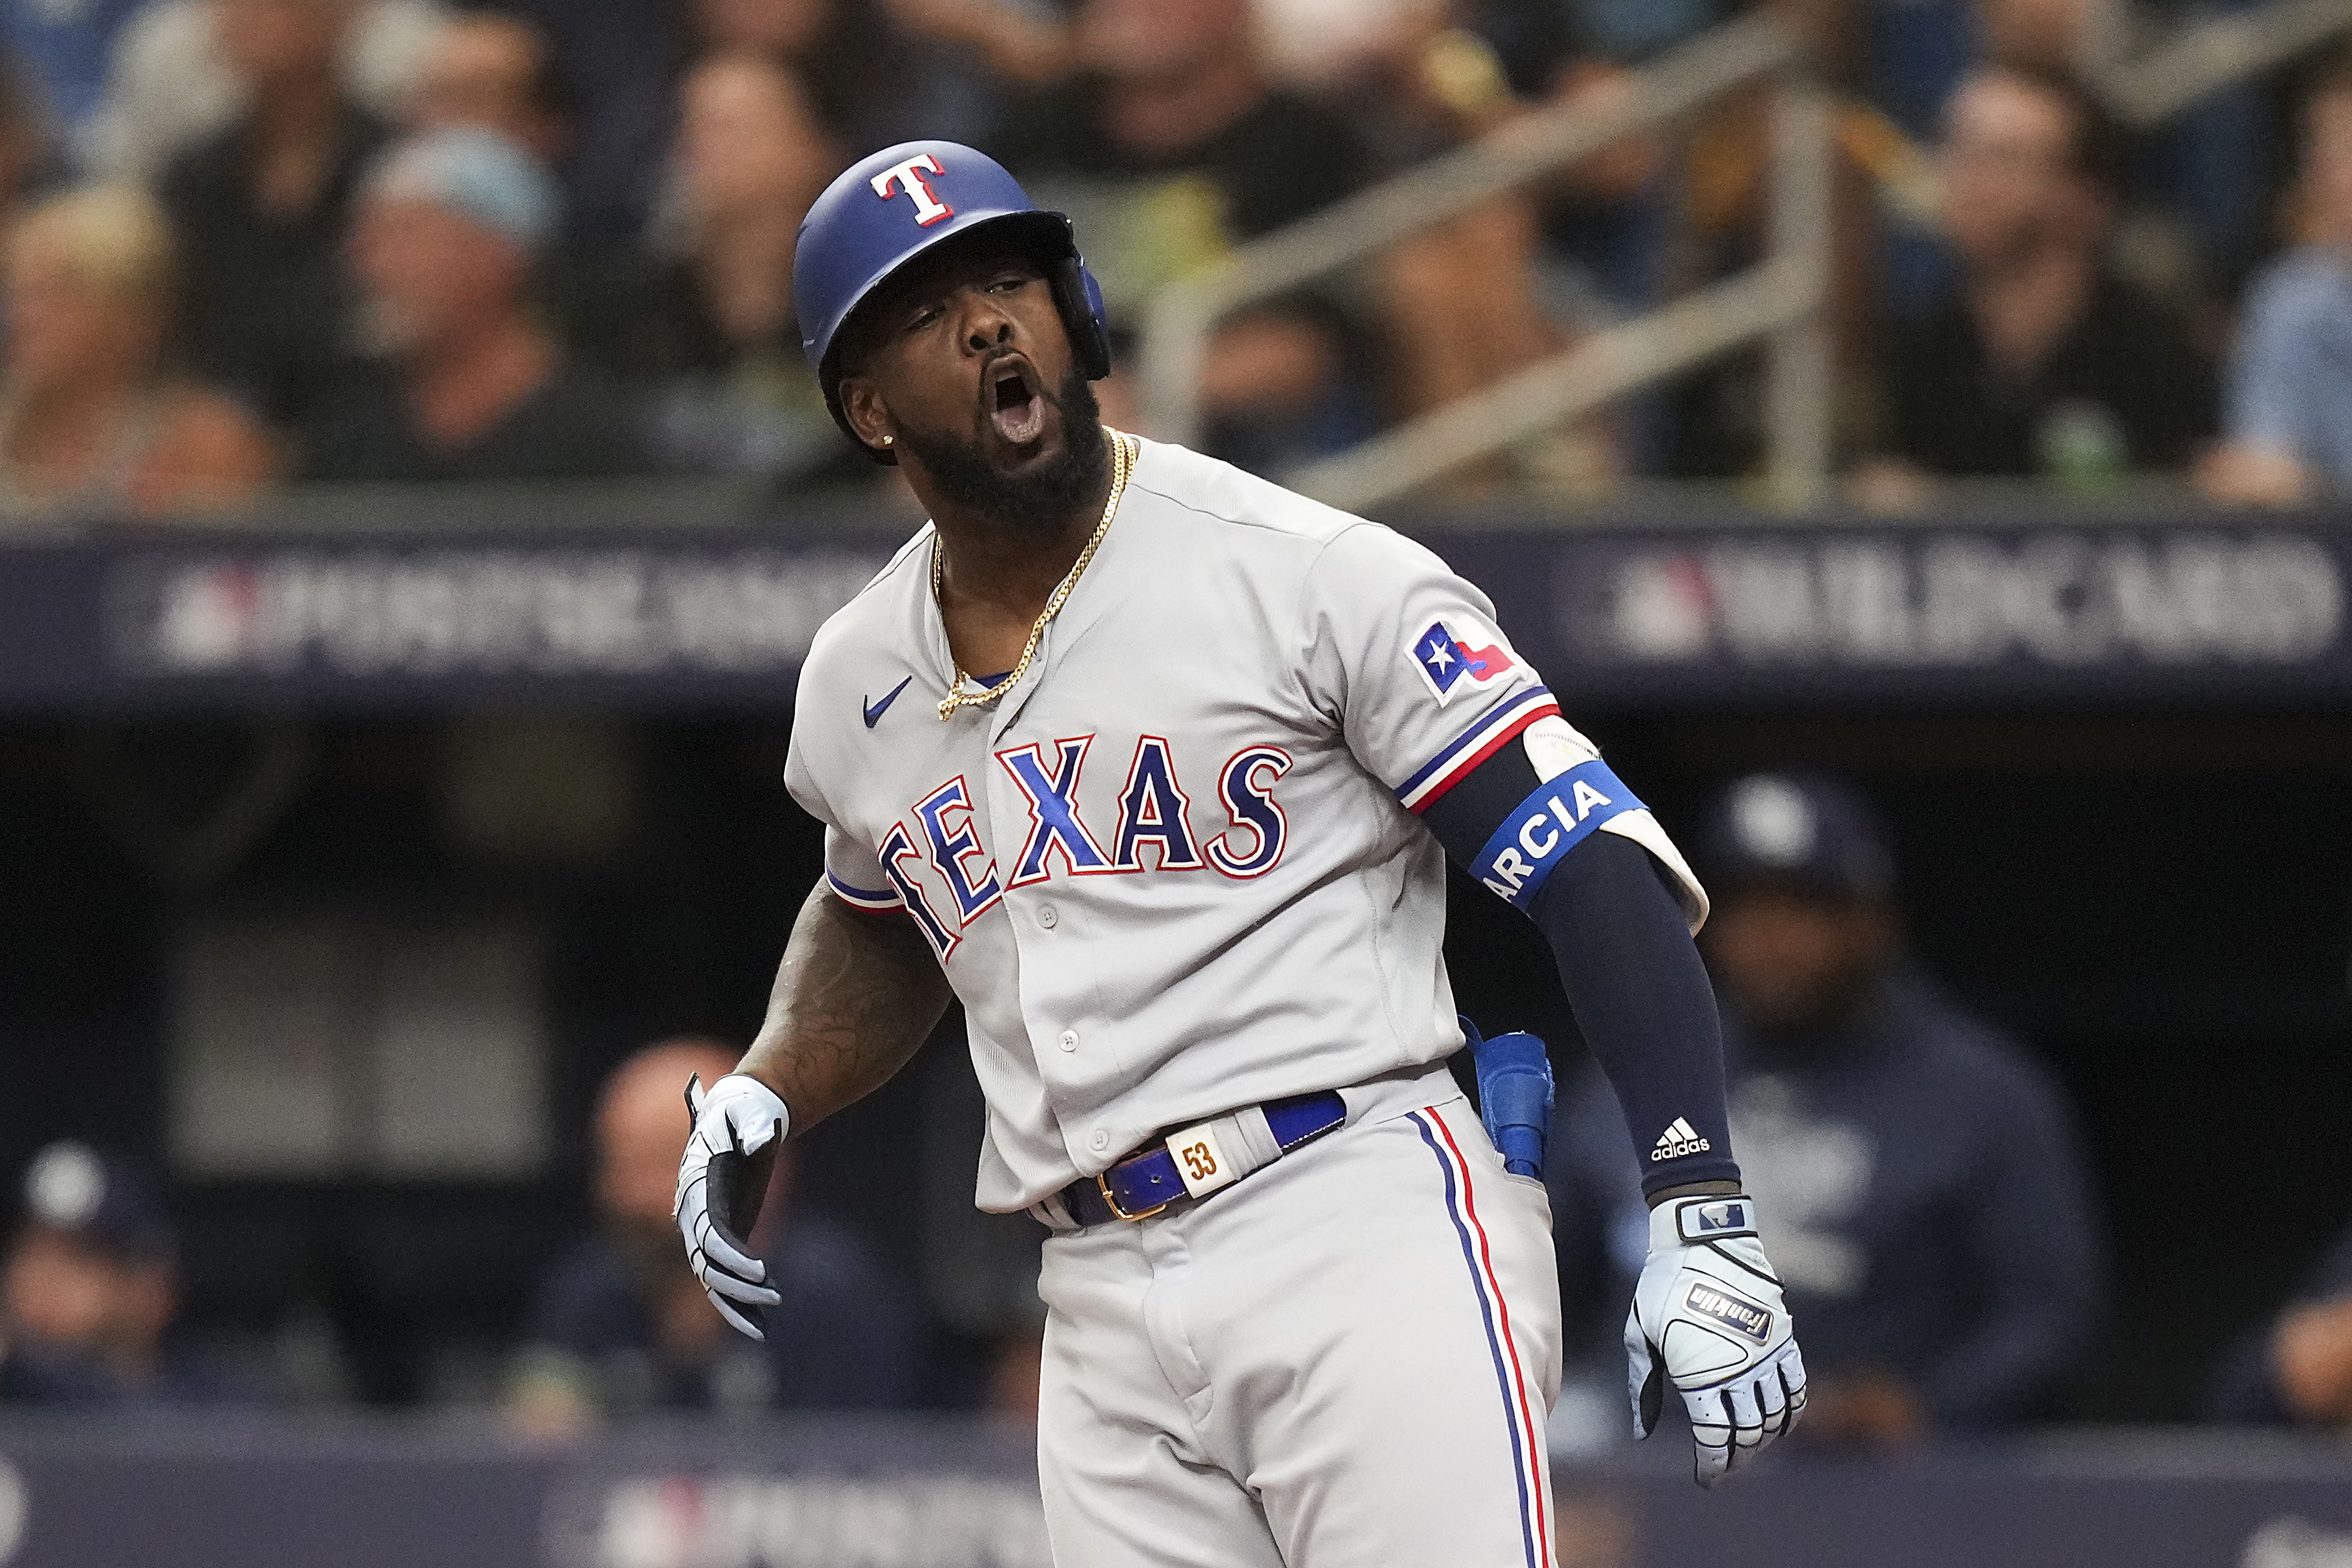 Manny homer lifts Sox over Rangers